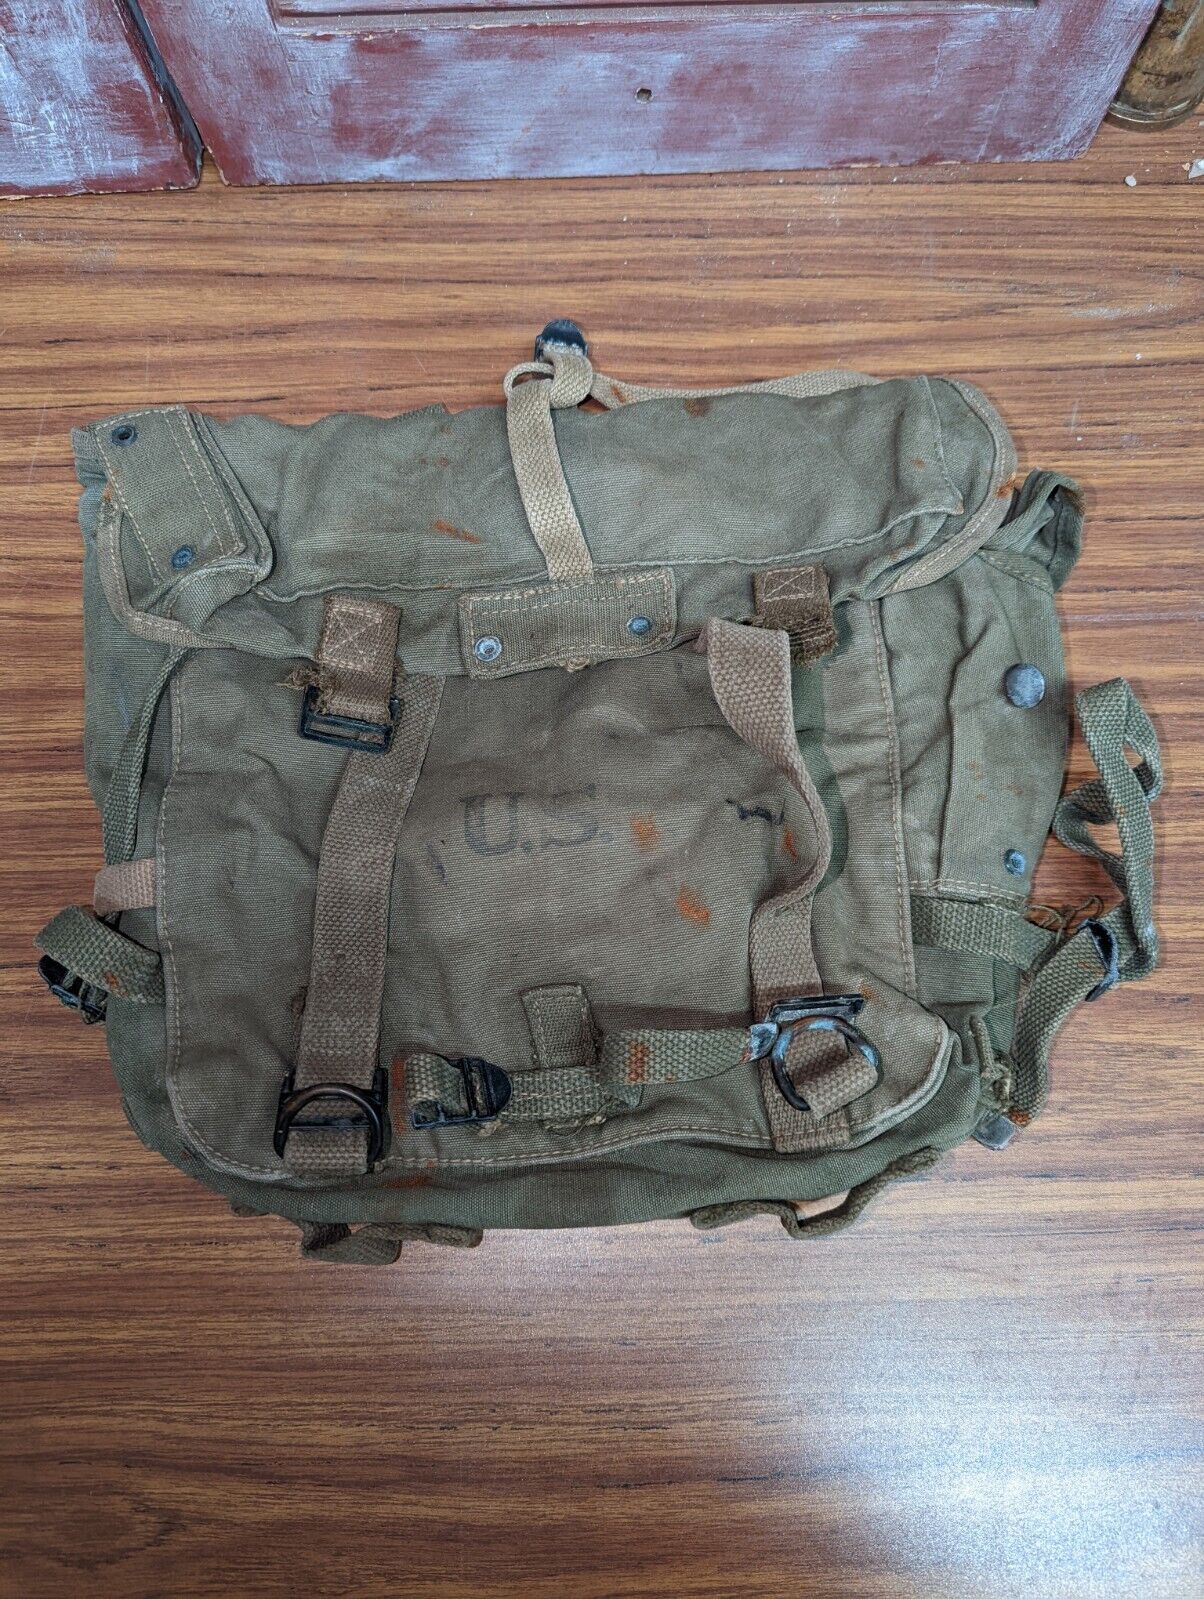 US WW2 Army M1944/M1945 combat back pack dated 1945